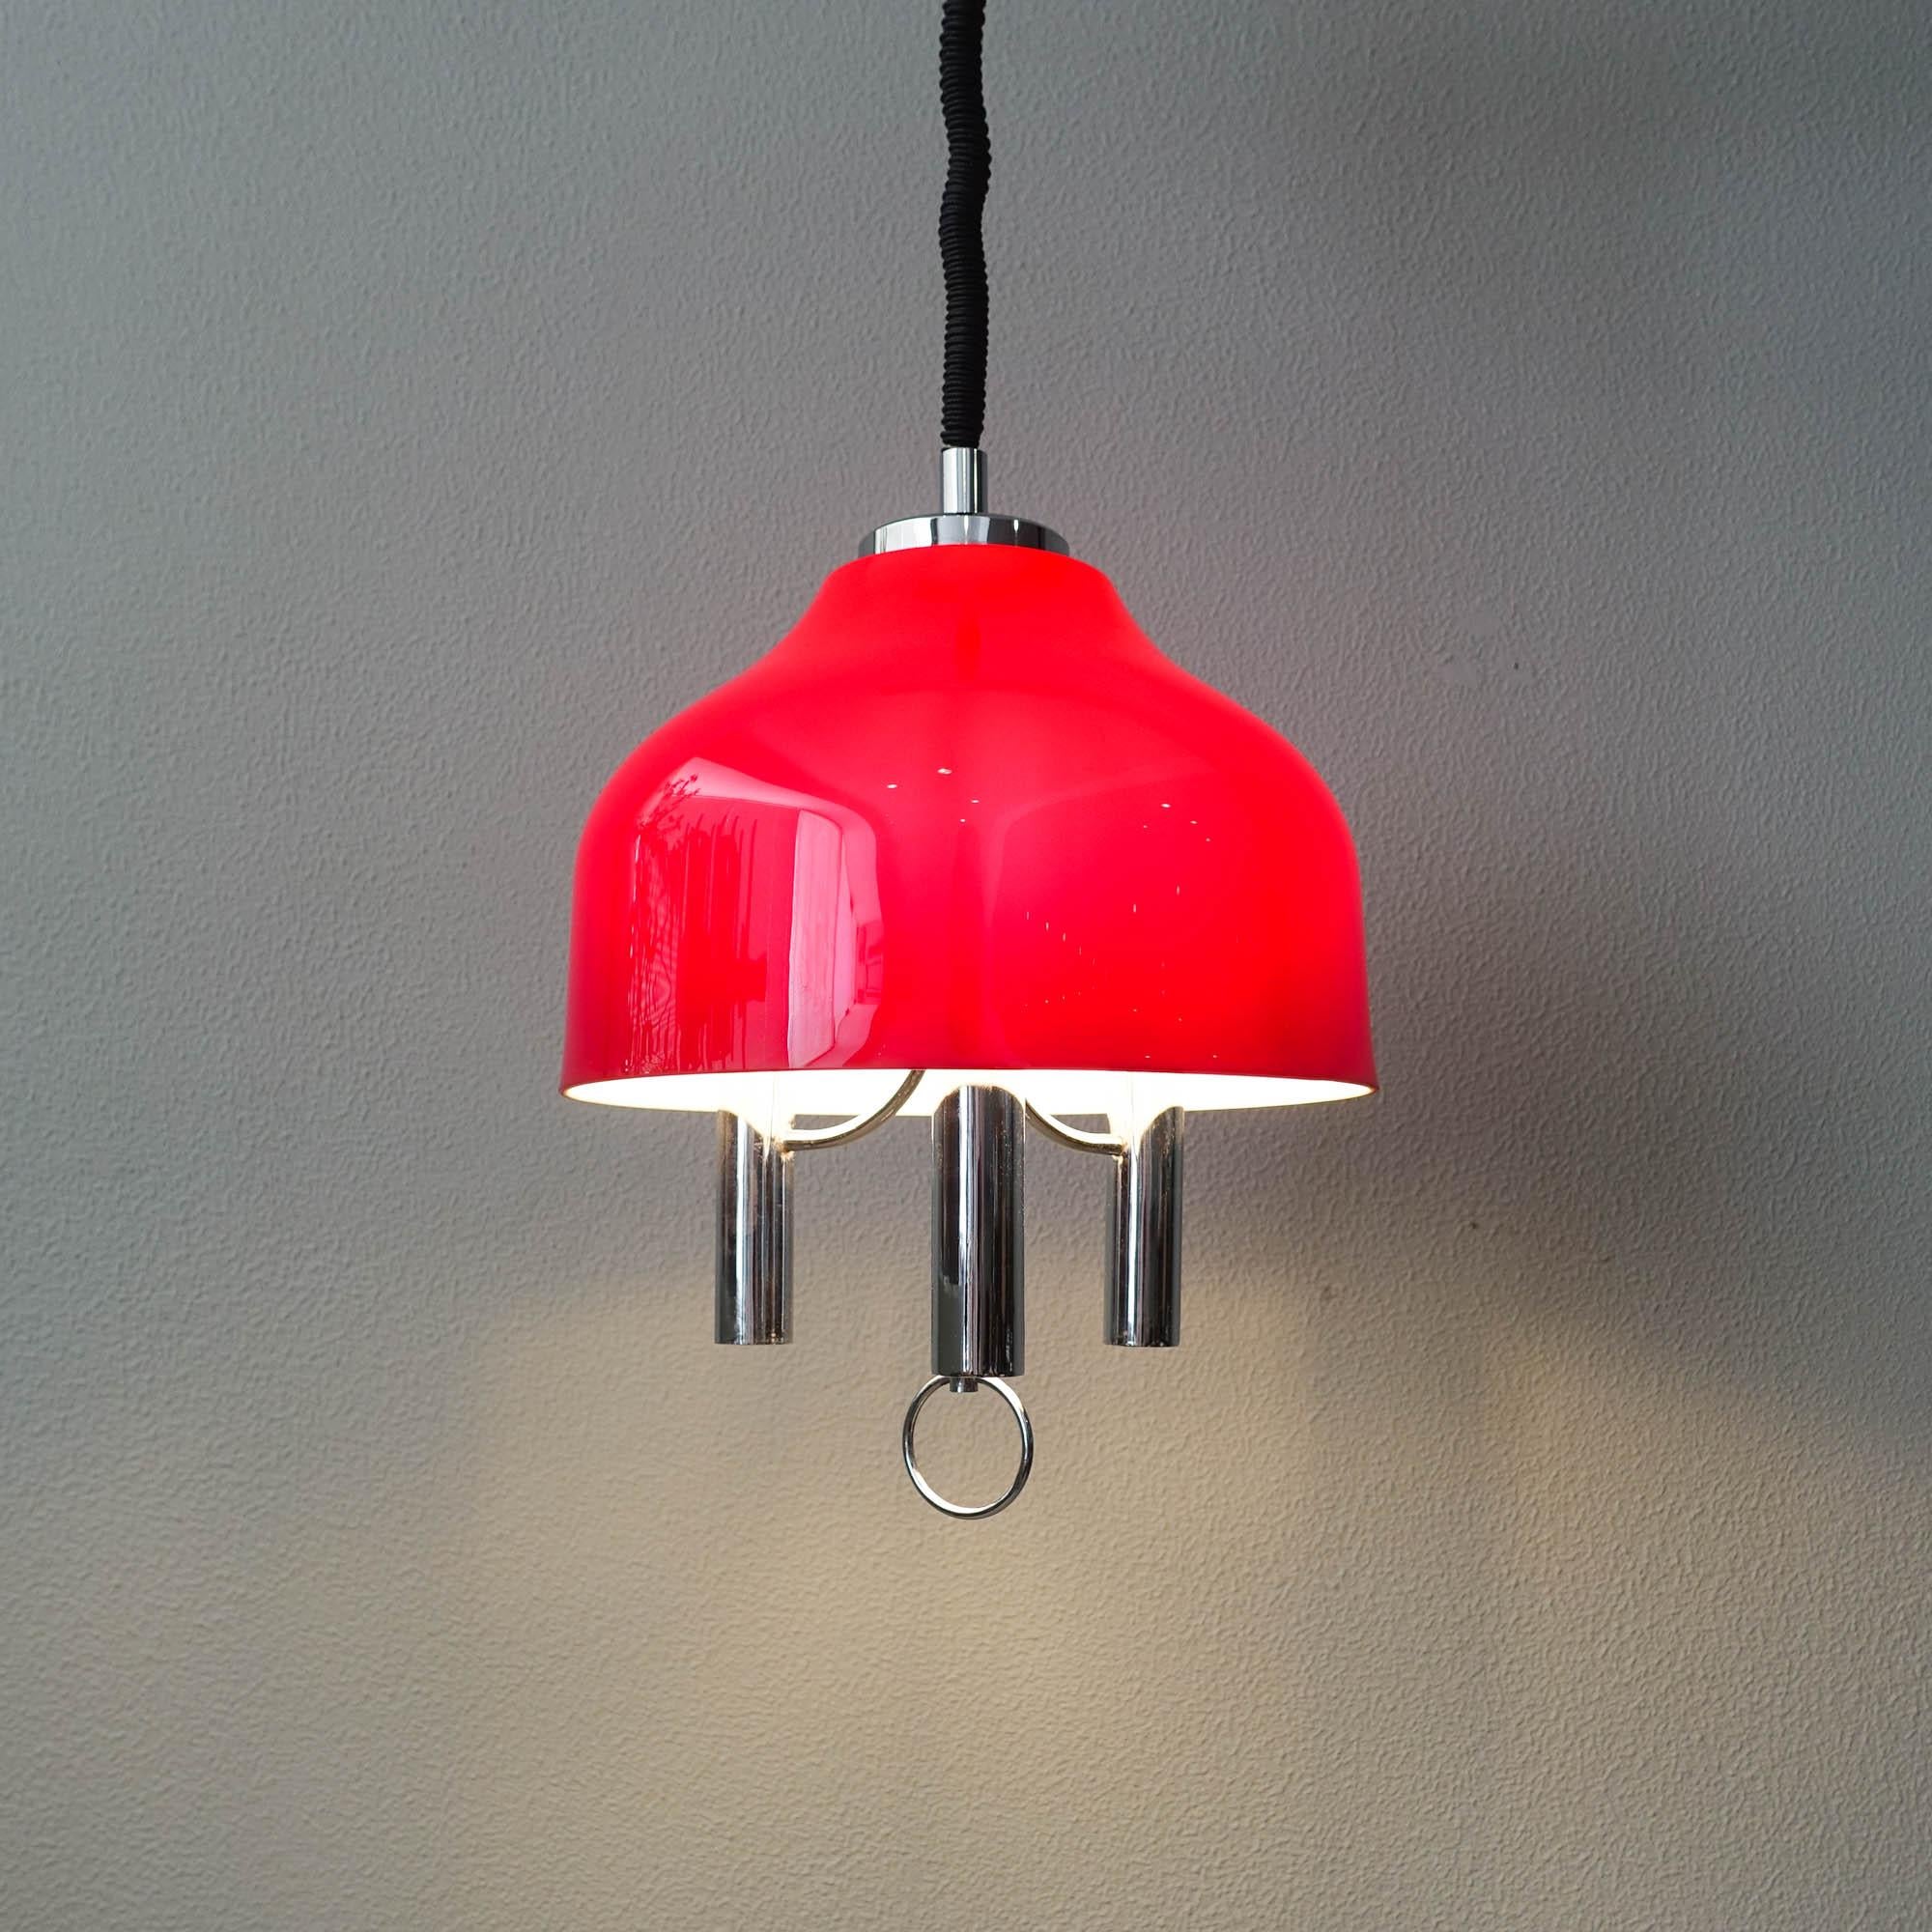 This pendant lamp was designed and produced in Spain during the 1970's. It features a red acrylic lampshade, with white inside, and a chrome structure with three light points. With rise and fall mechanism in good condition and a chrome pull in the